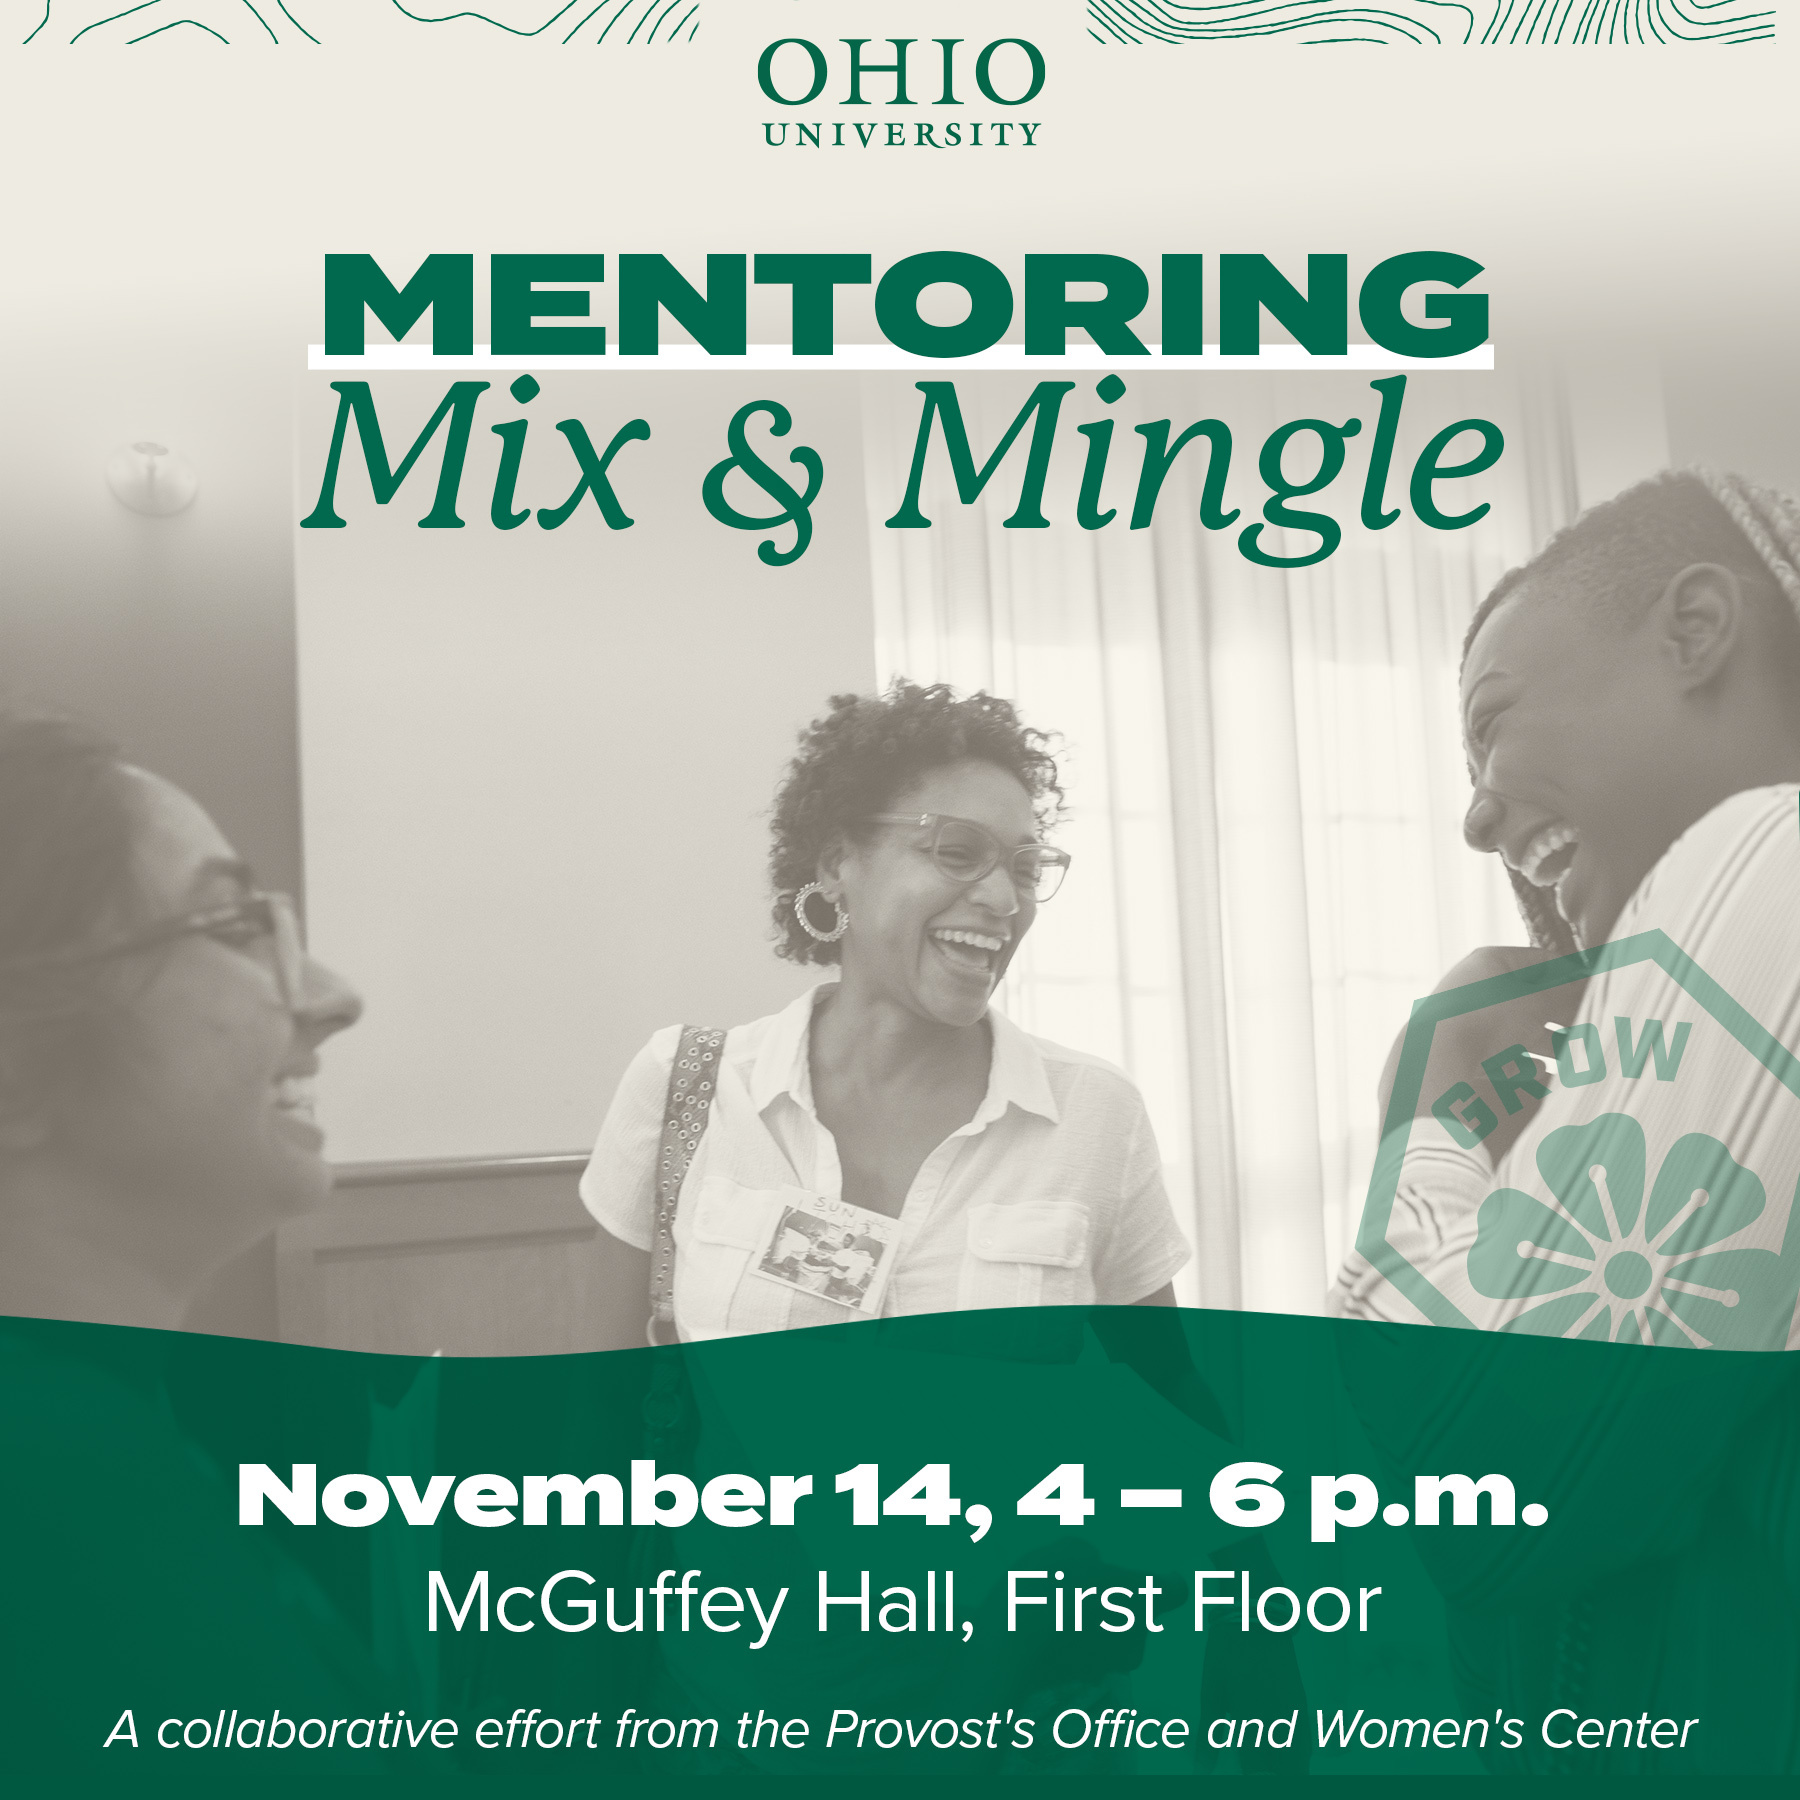 Mentoring Mix and Mingle flyer hosted by the Women's Center and Office of the Provost 